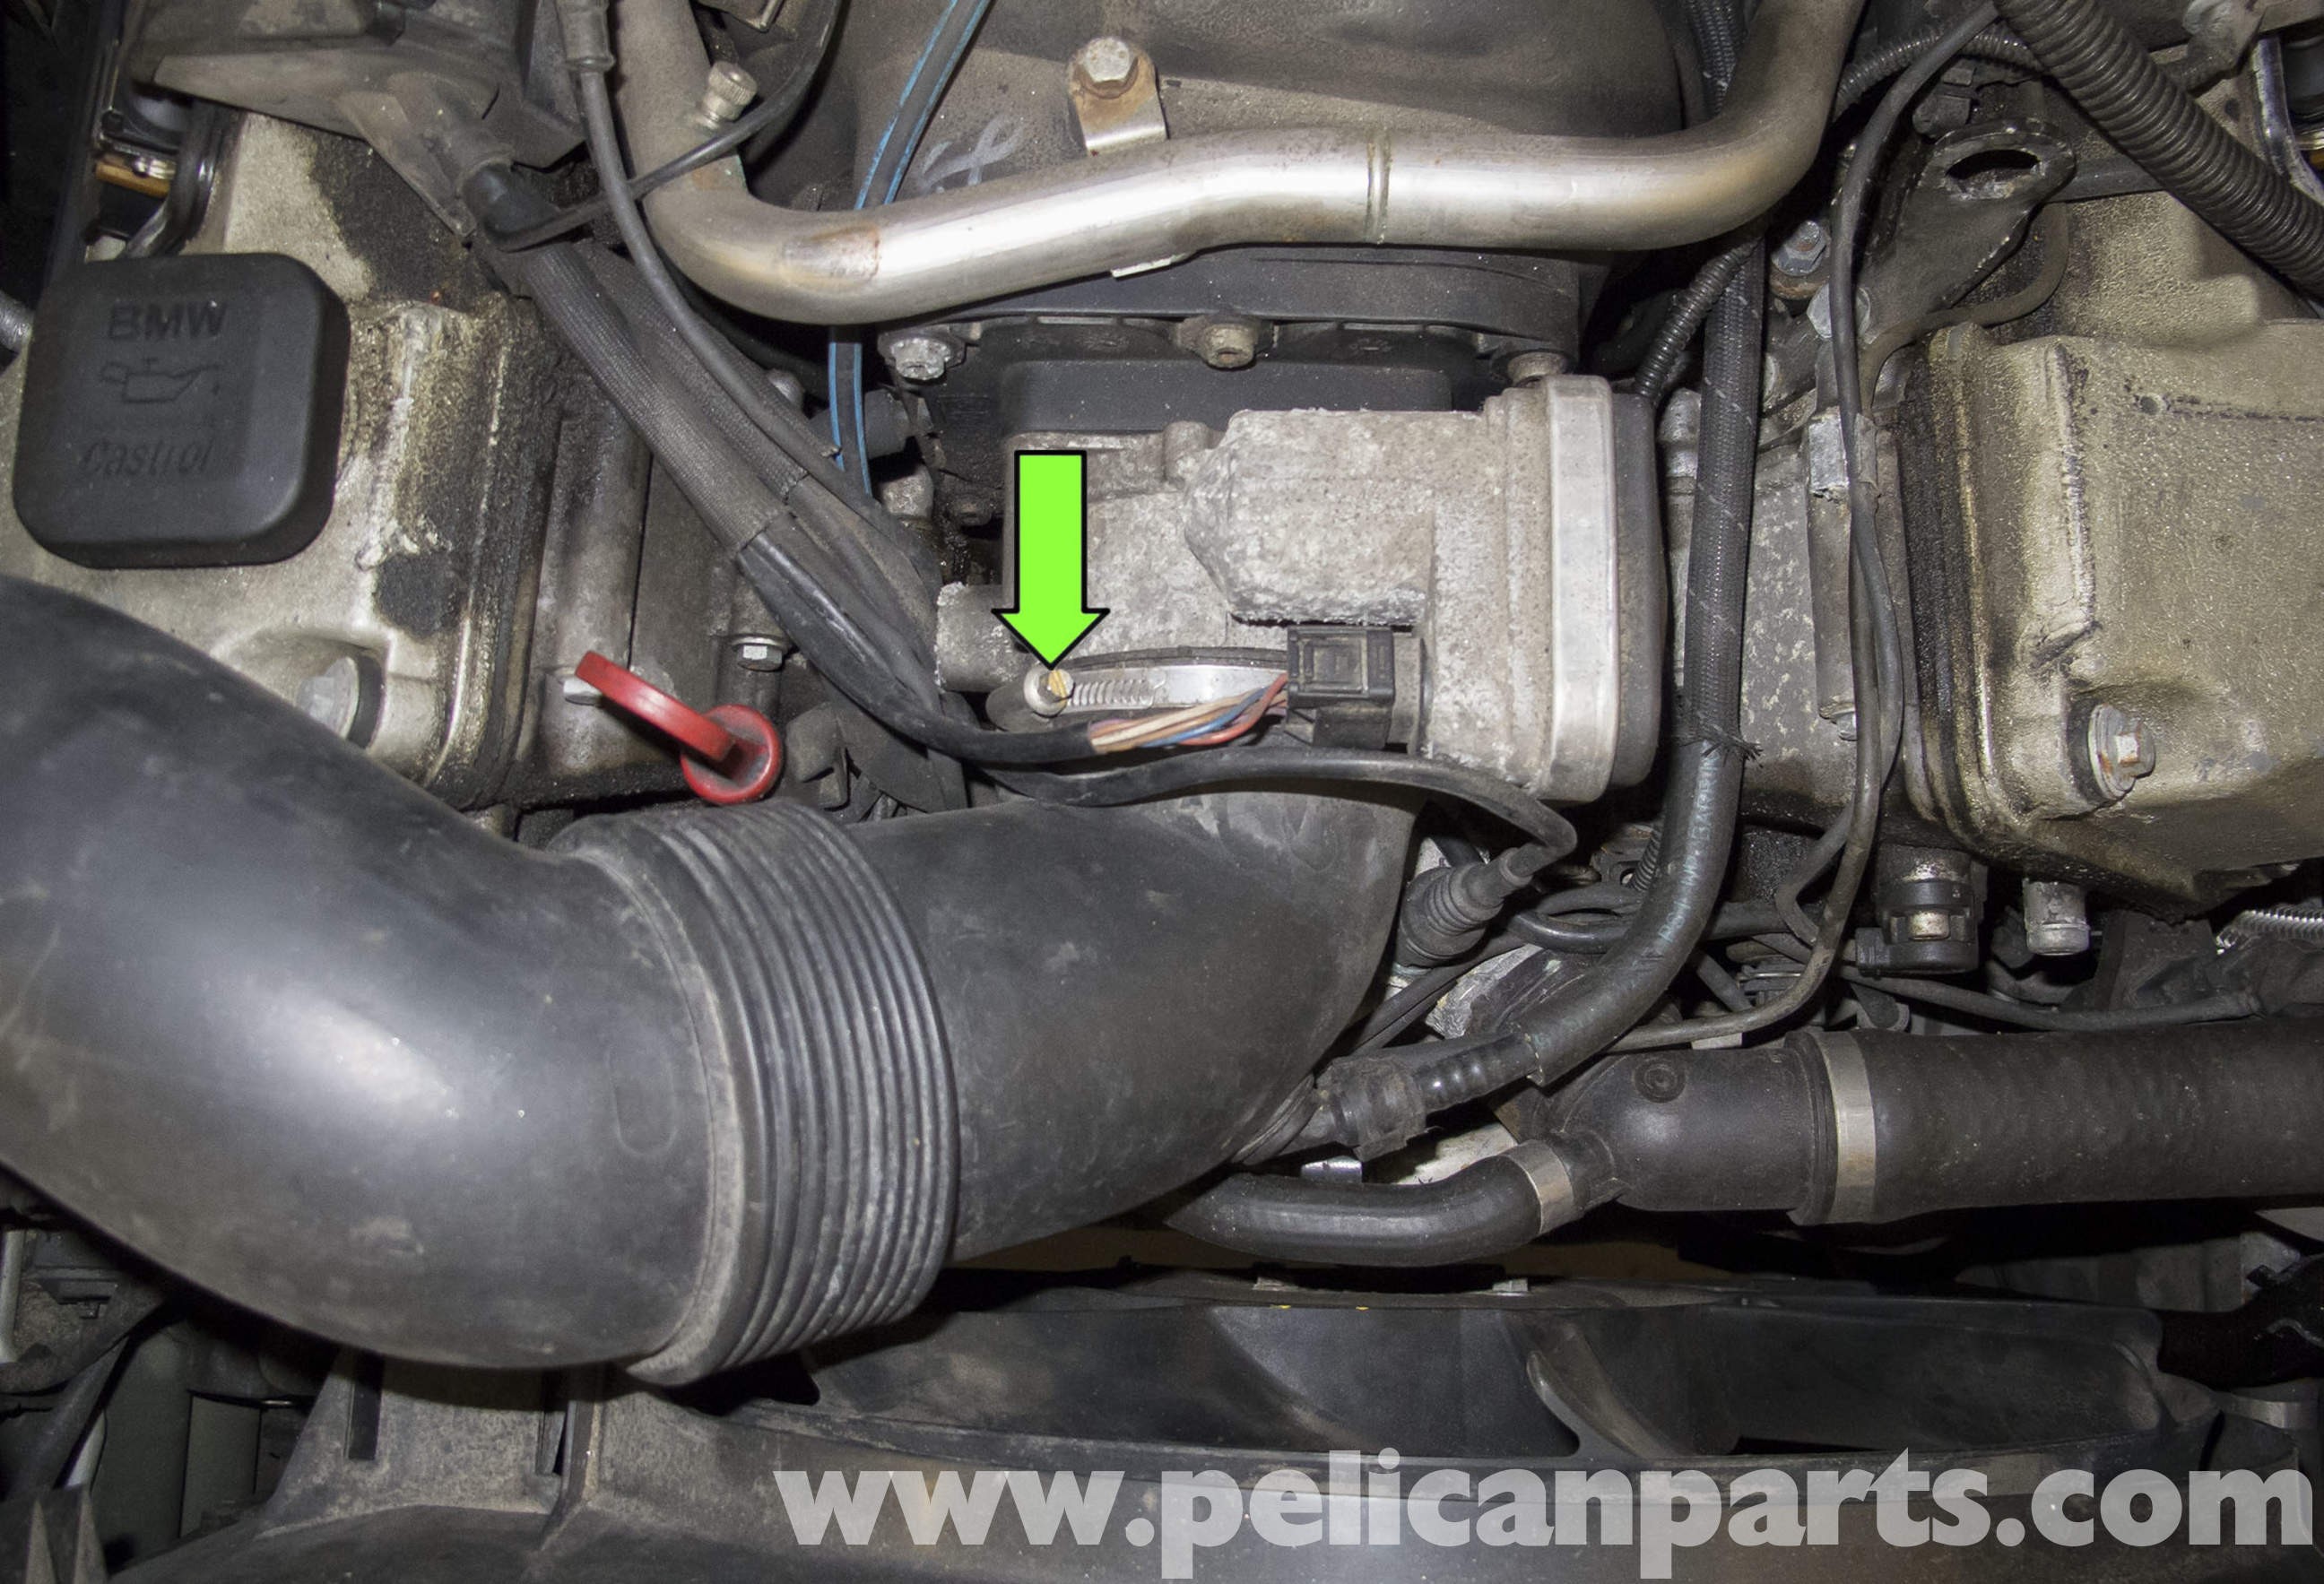 2005 Bmw X5 Engine Diagram Bmw X5 Engine Valley Pan and Coolant Pipes Removal E53 2000 2006 Of 2005 Bmw X5 Engine Diagram